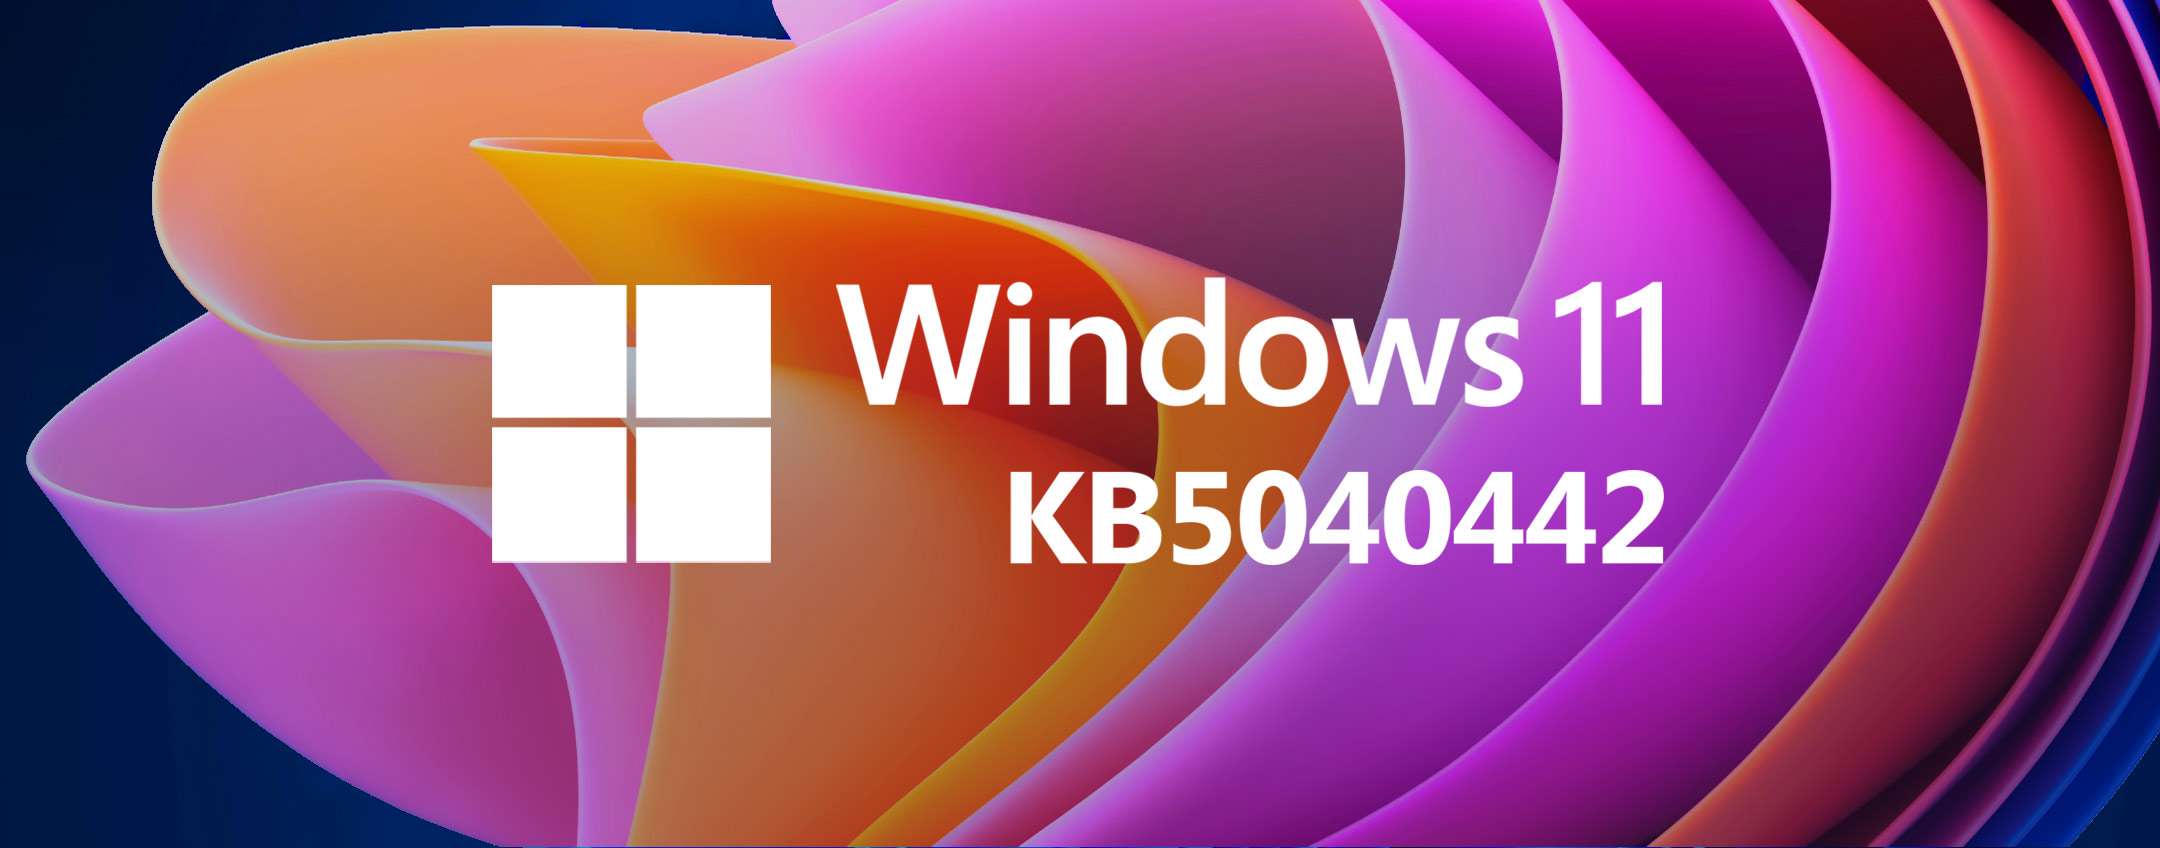 Windows 11 KB5040442: What’s new in the update